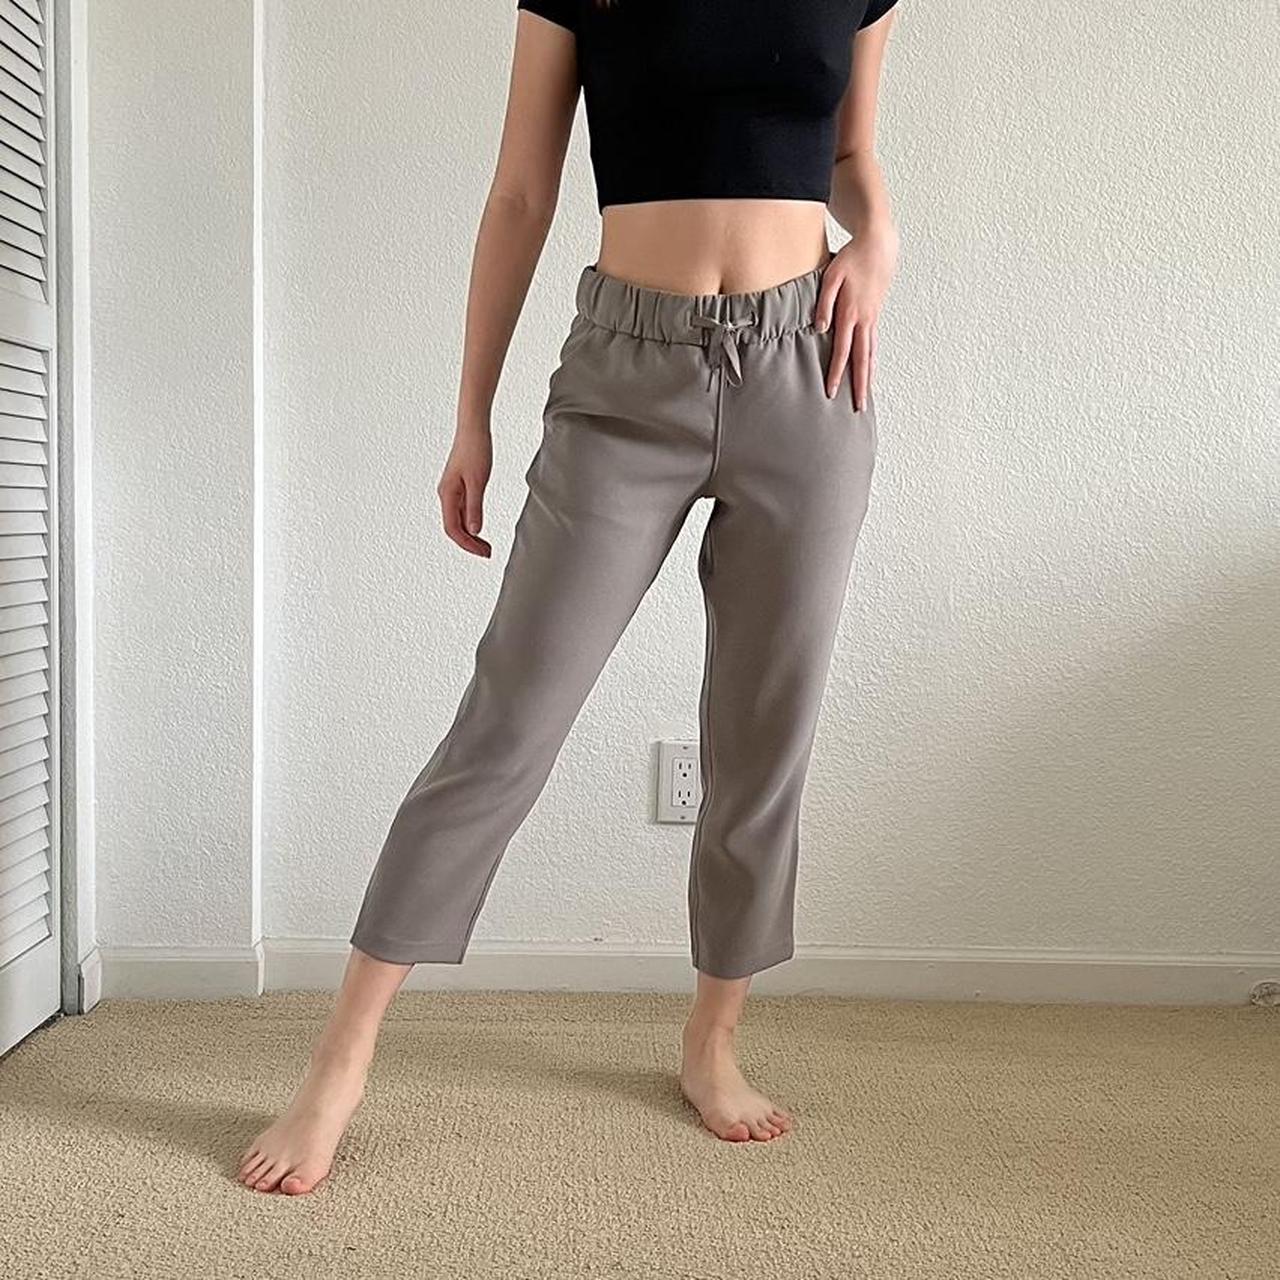 Lululemon On the Fly Cropped Pants - woven gray - Depop